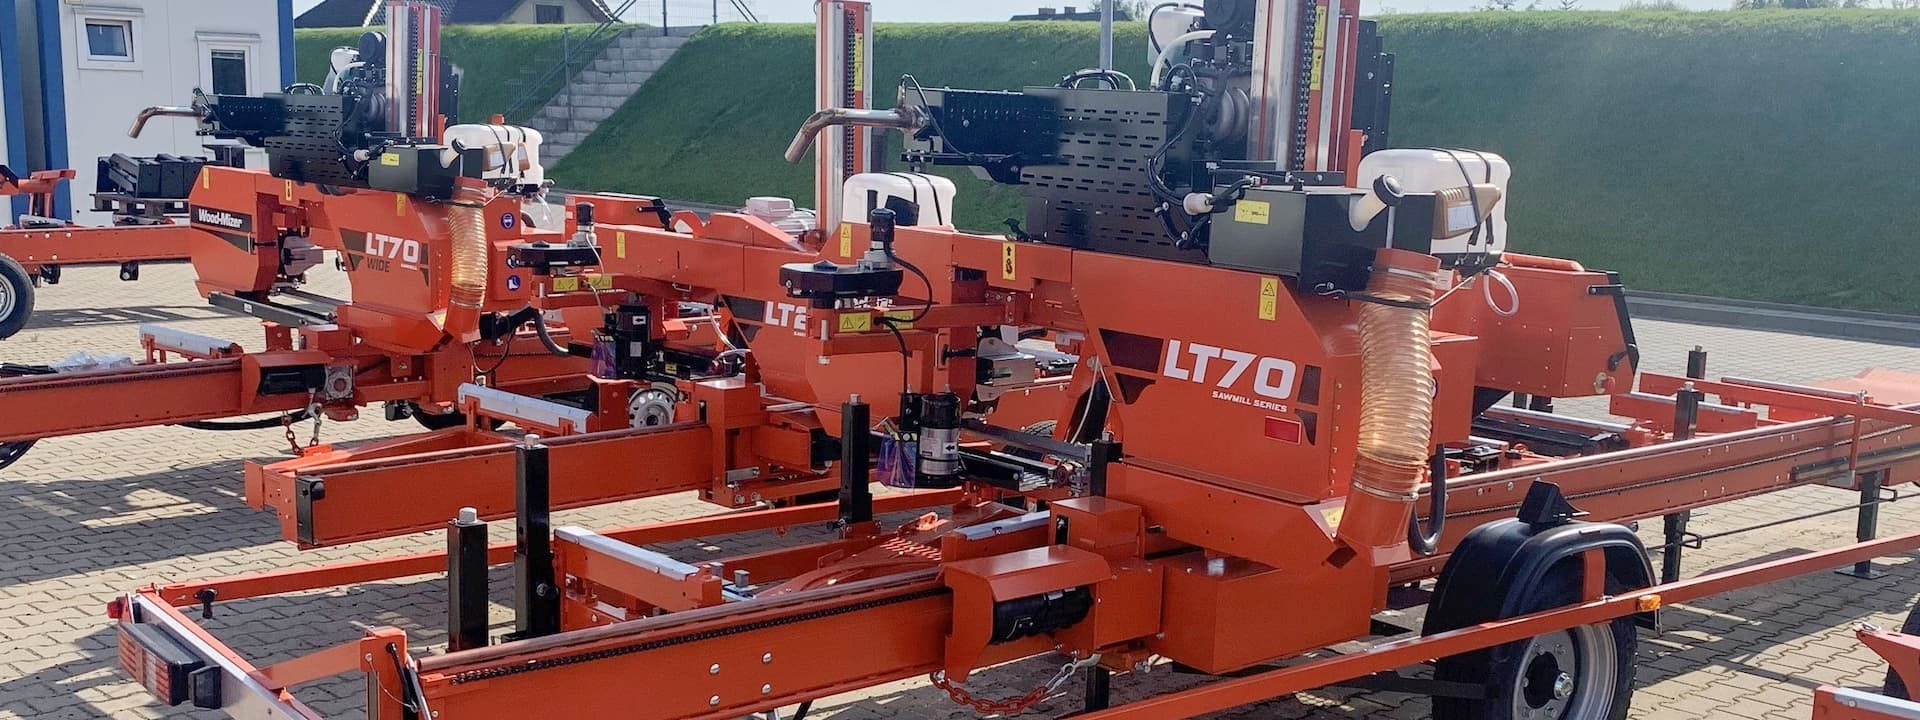 Wood-Mizer Introduces New G57 Gasoline Engine for LT70 and LT70WIDE mobile sawmills